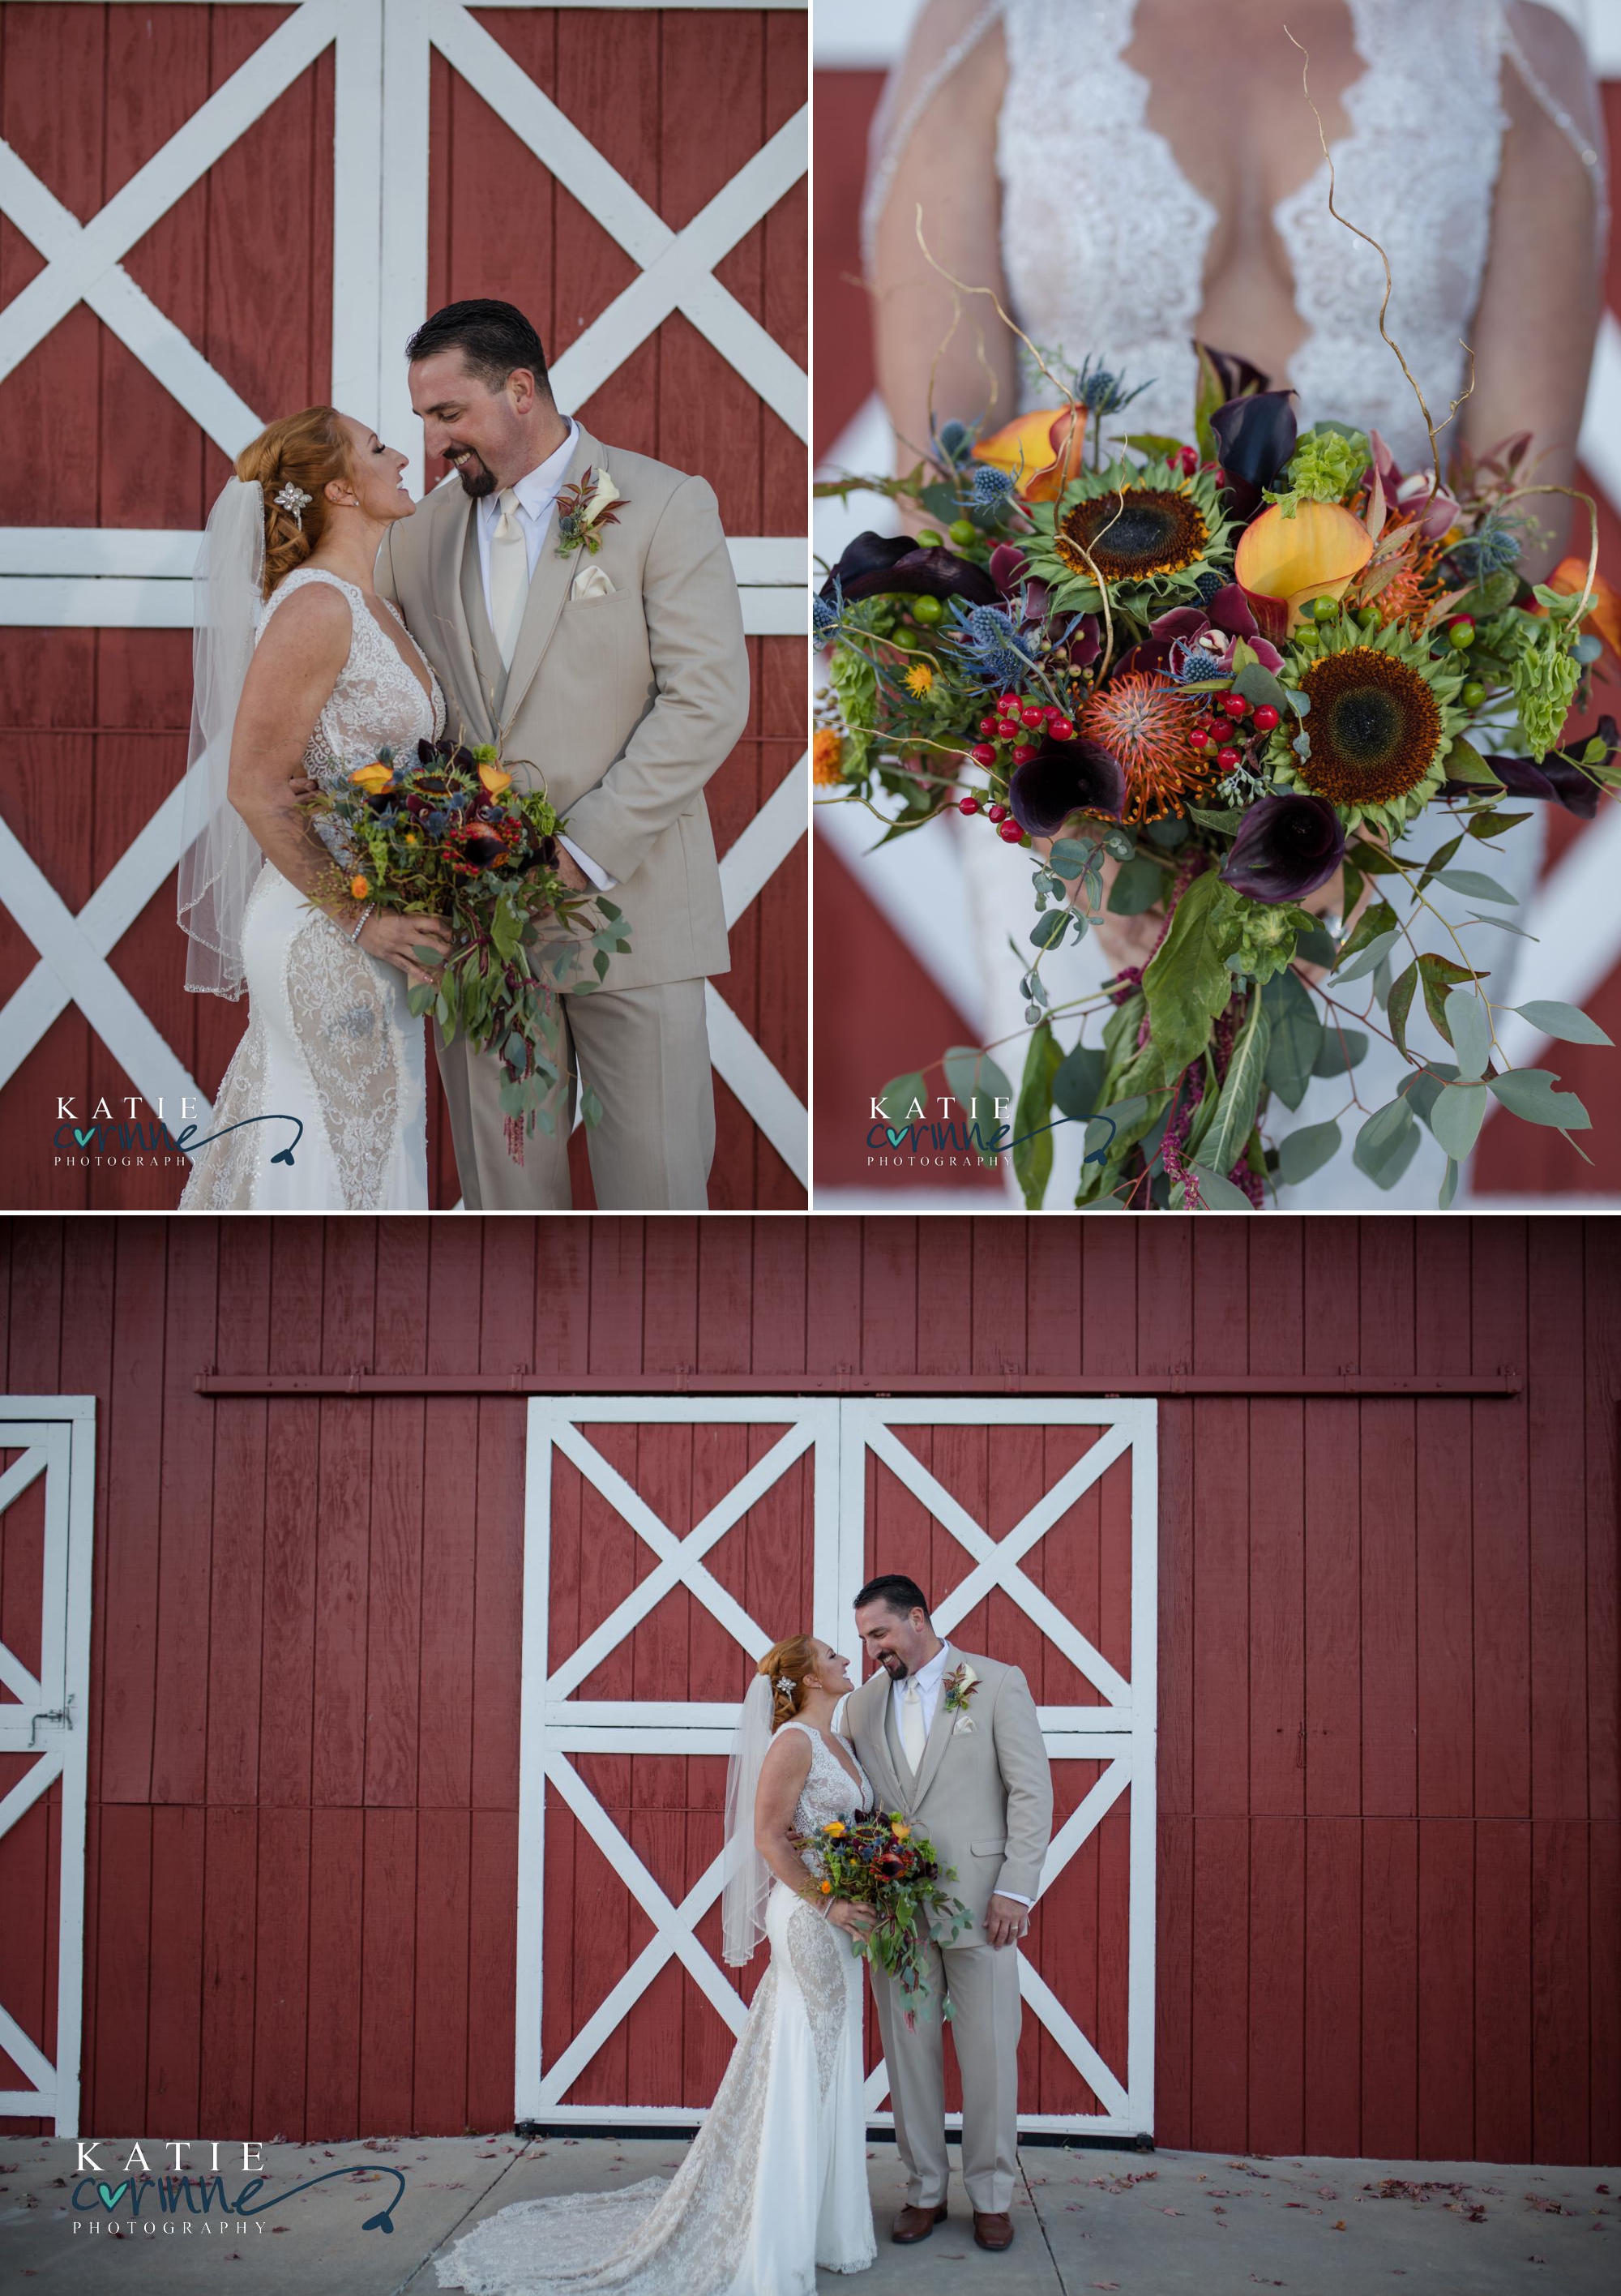 Colorado Springs couple take portraits in front of barn